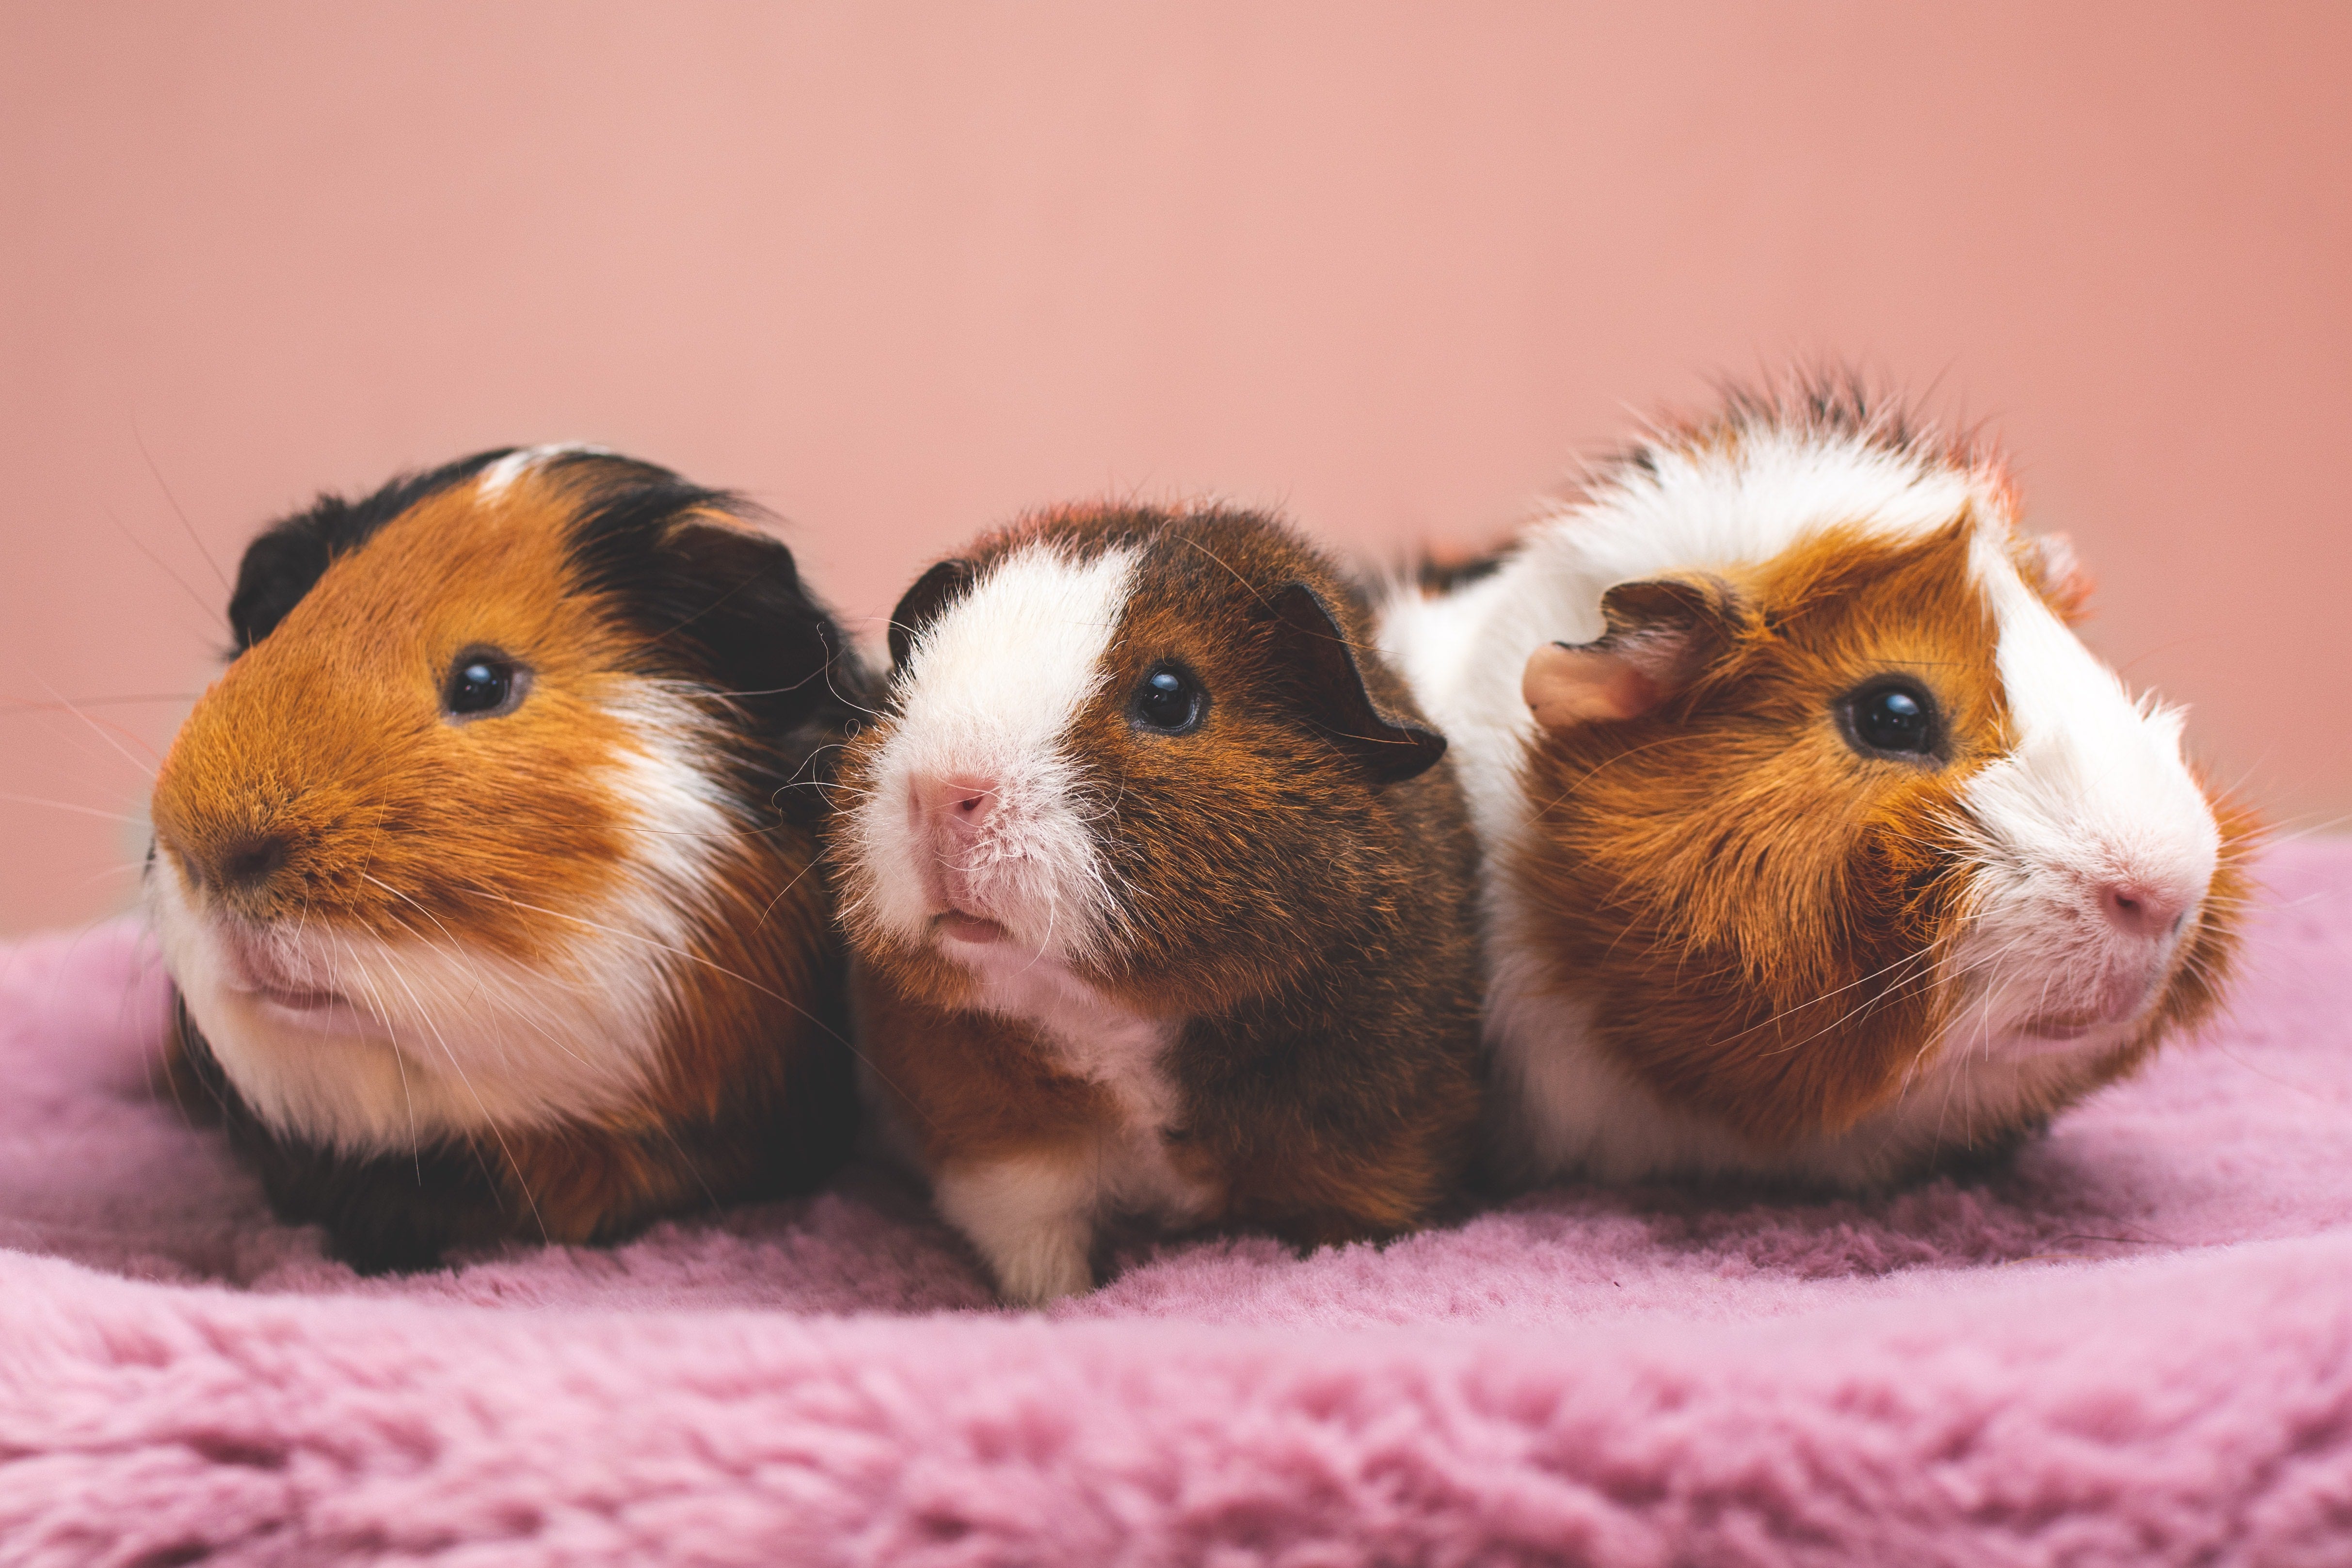 Are guinea pigs good pets? NYC shelters photo